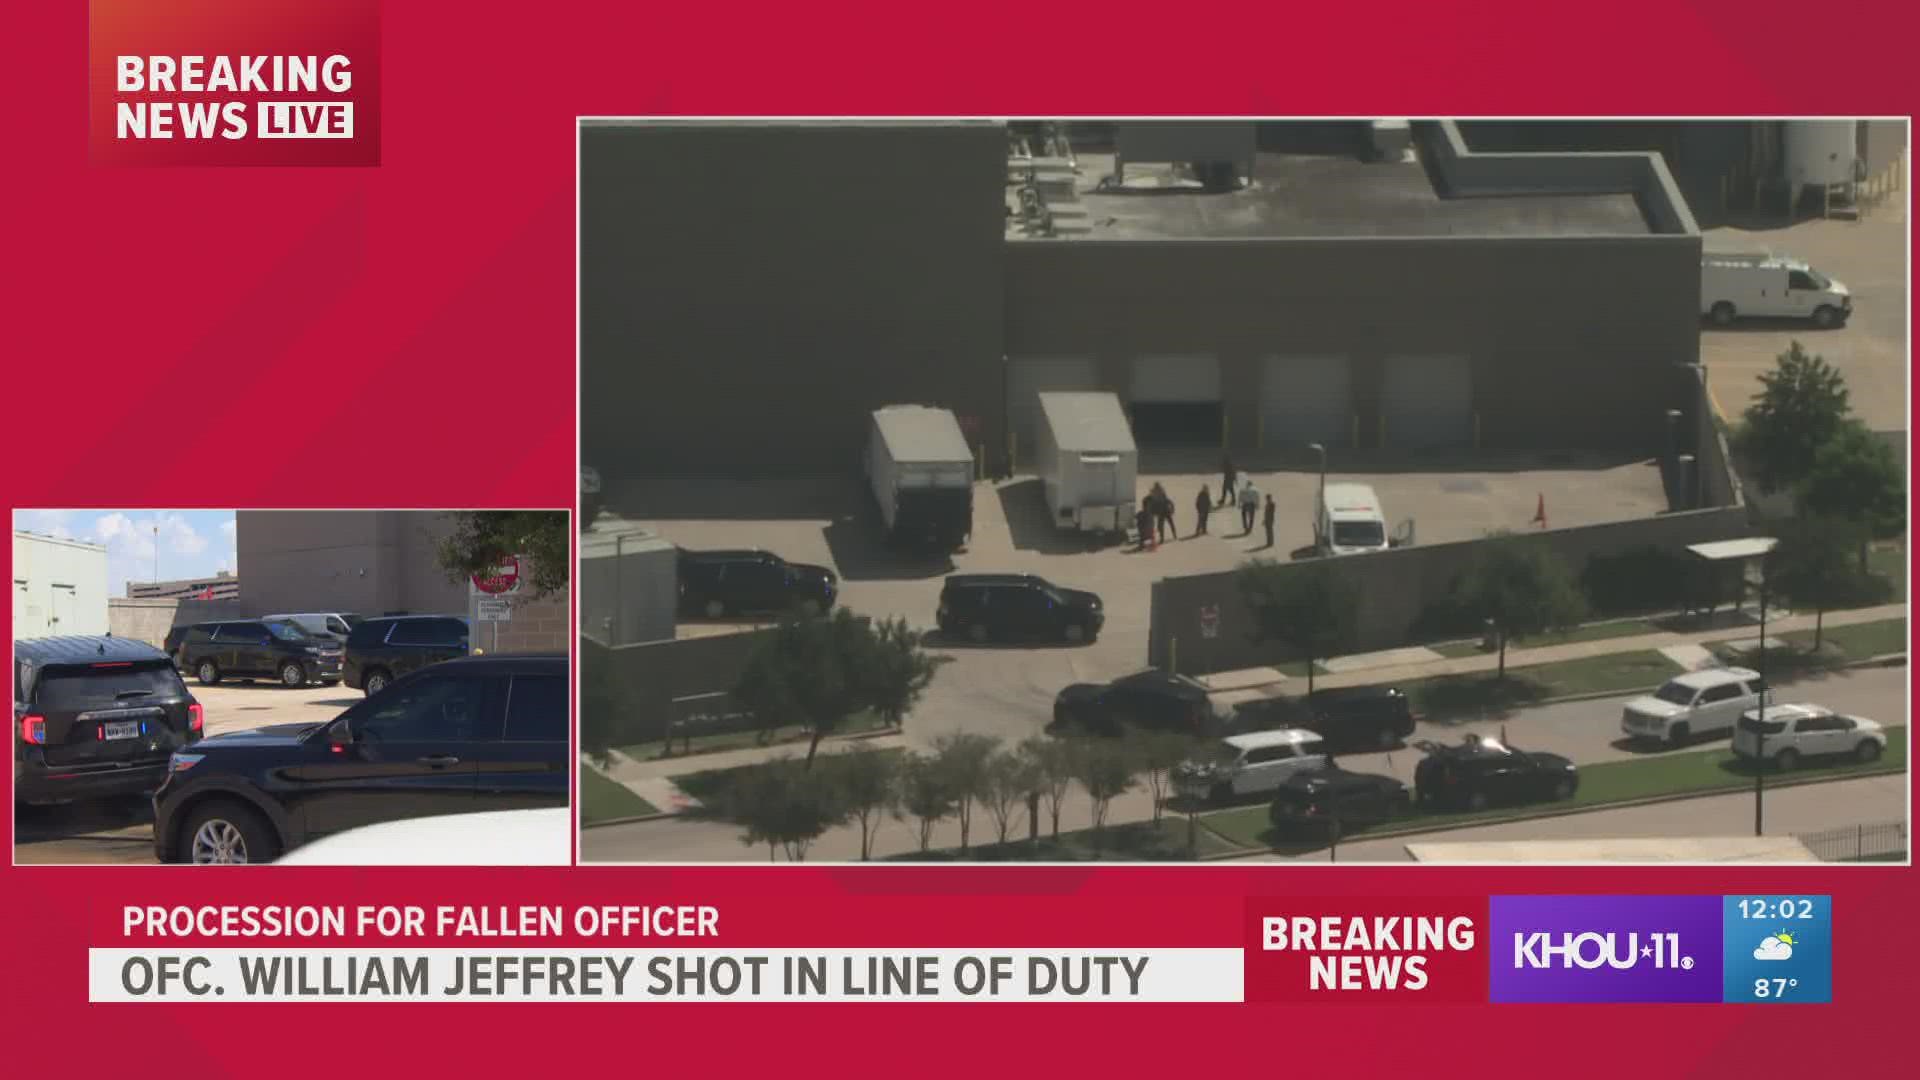 The body of fallen HPD officer William "Bill" Jeffery" arrives at medical examiner's office followed by police escort.